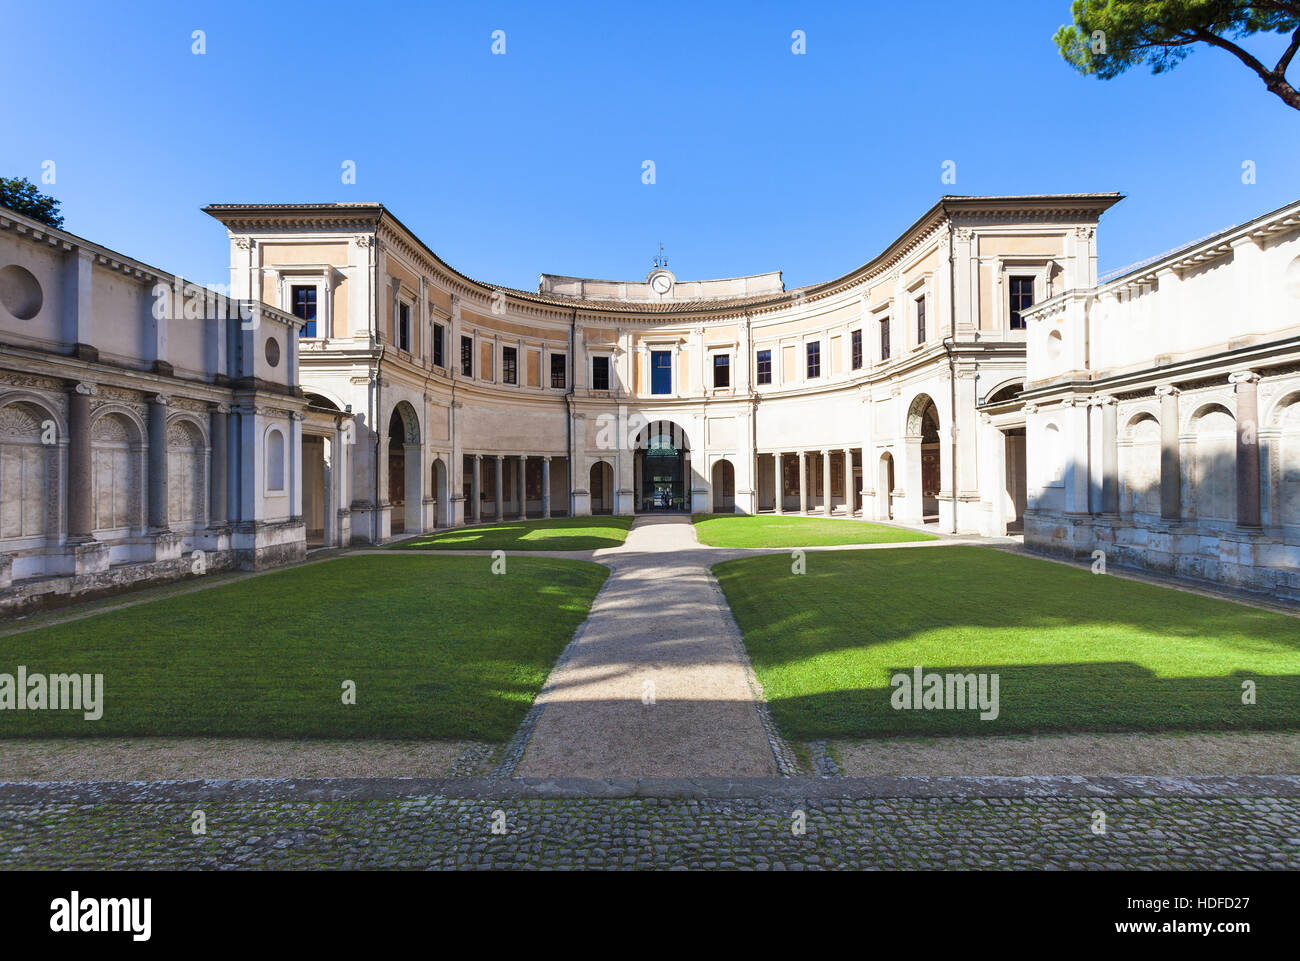 ROME, ITALY - NOVEMBER 1, 2016: yard of Villa Giulia, houses Museo Nazionale Etrusco (National Etruscan Museum), big collection of Etruscan art and ar Stock Photo